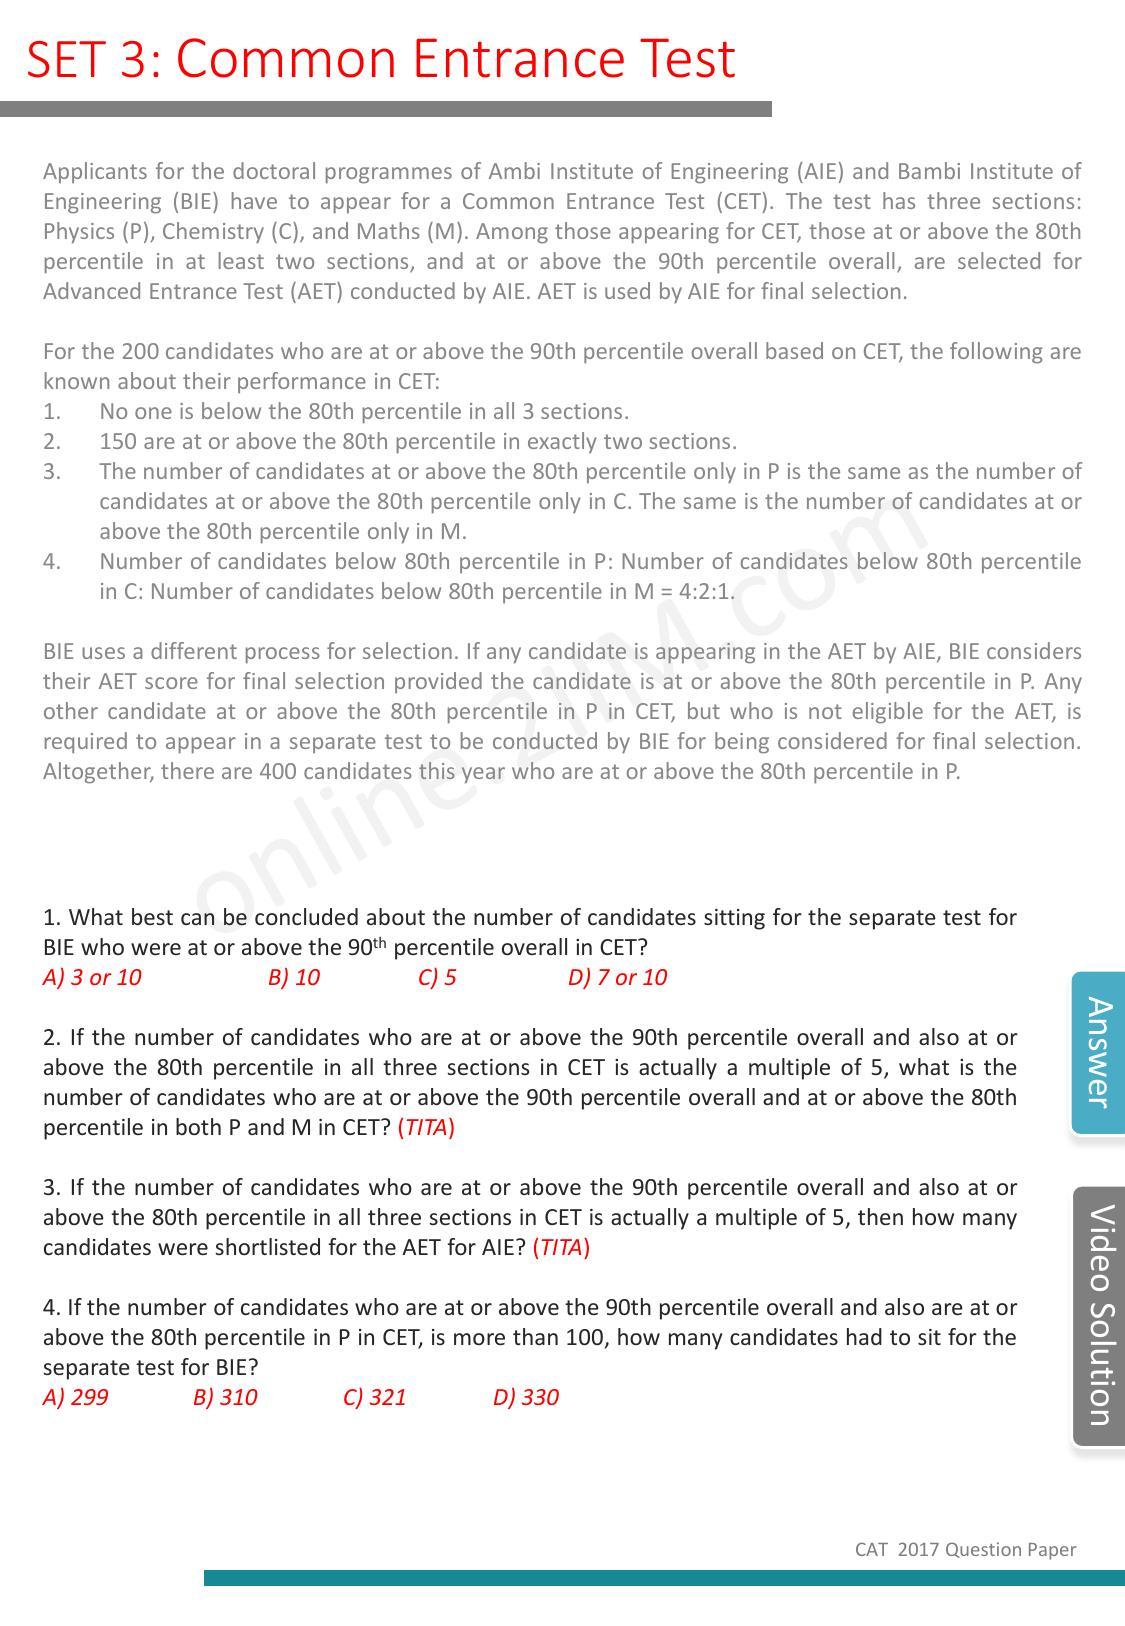 CAT 2017 CAT DILR Slot 1 Question Paper - Page 4